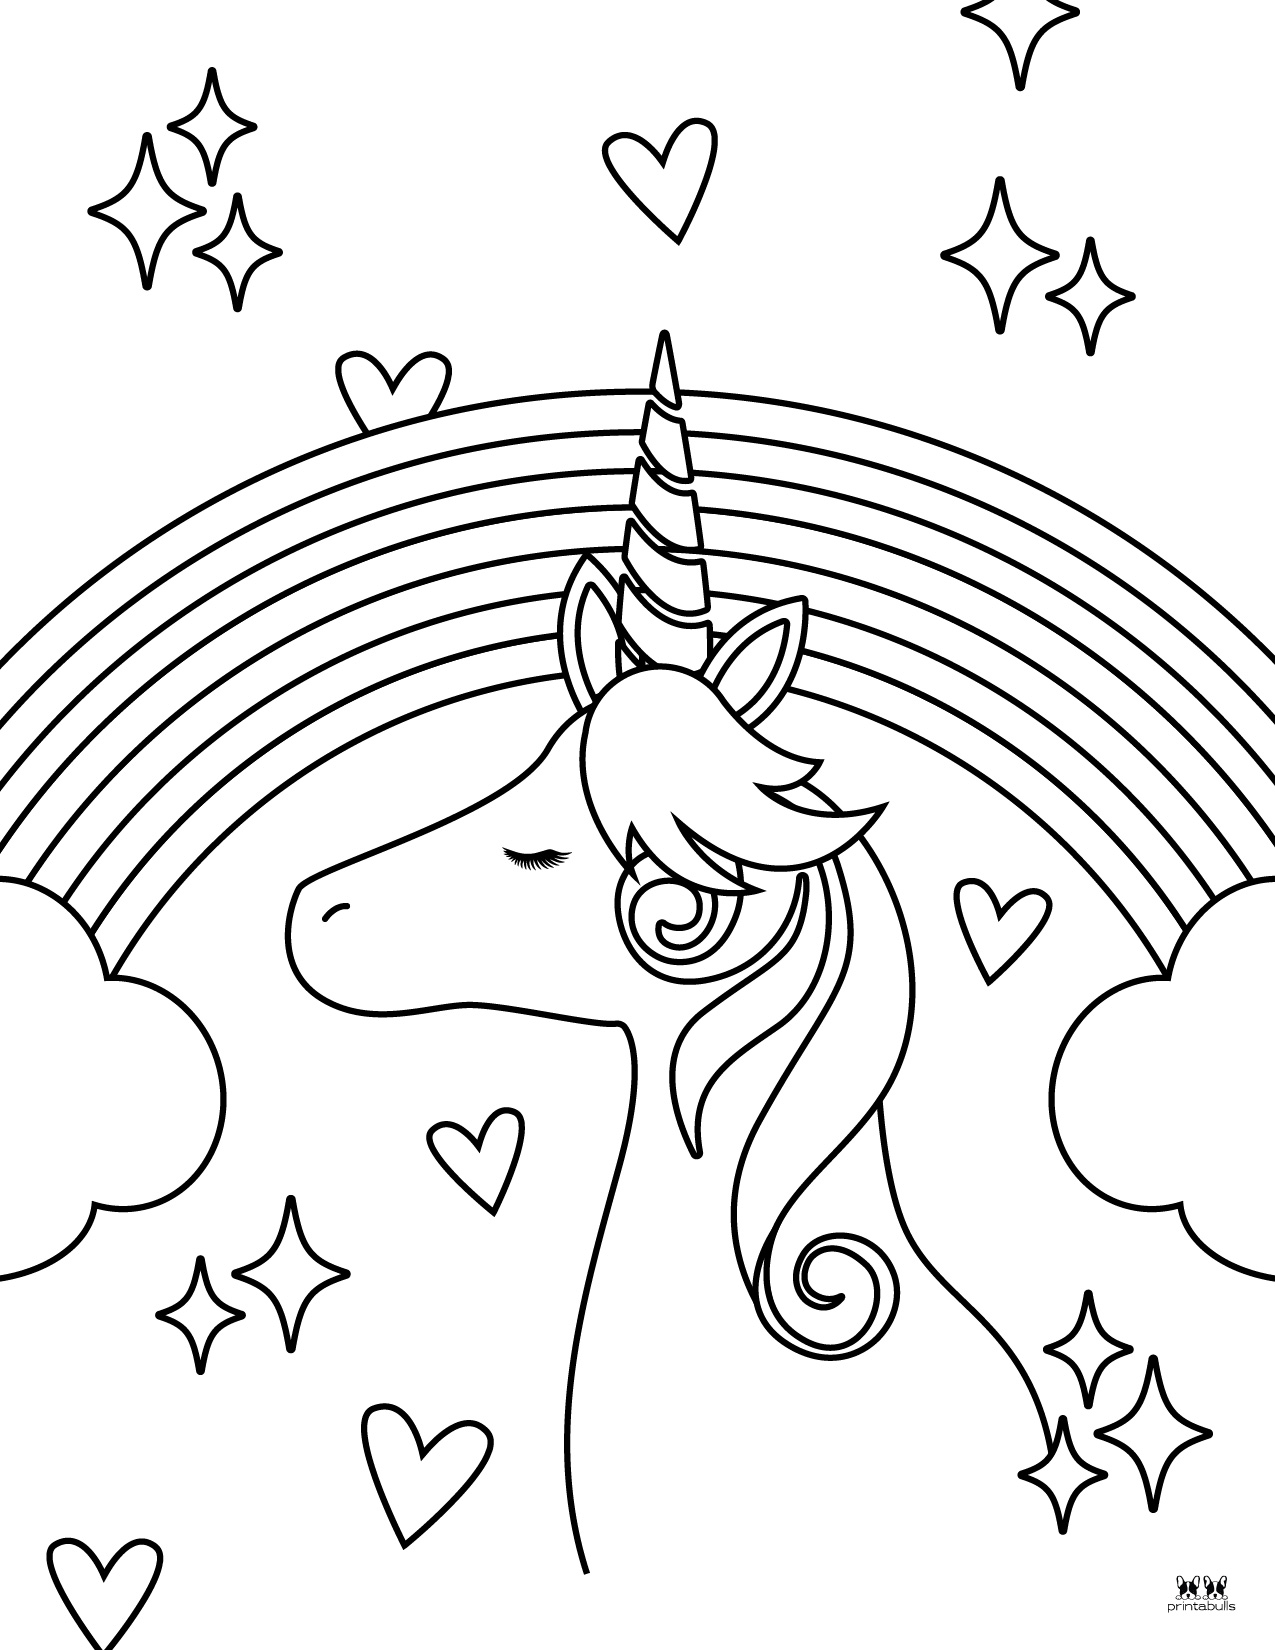 Free Coloring Pages With Rainbows Free Printable Rain vrogue co